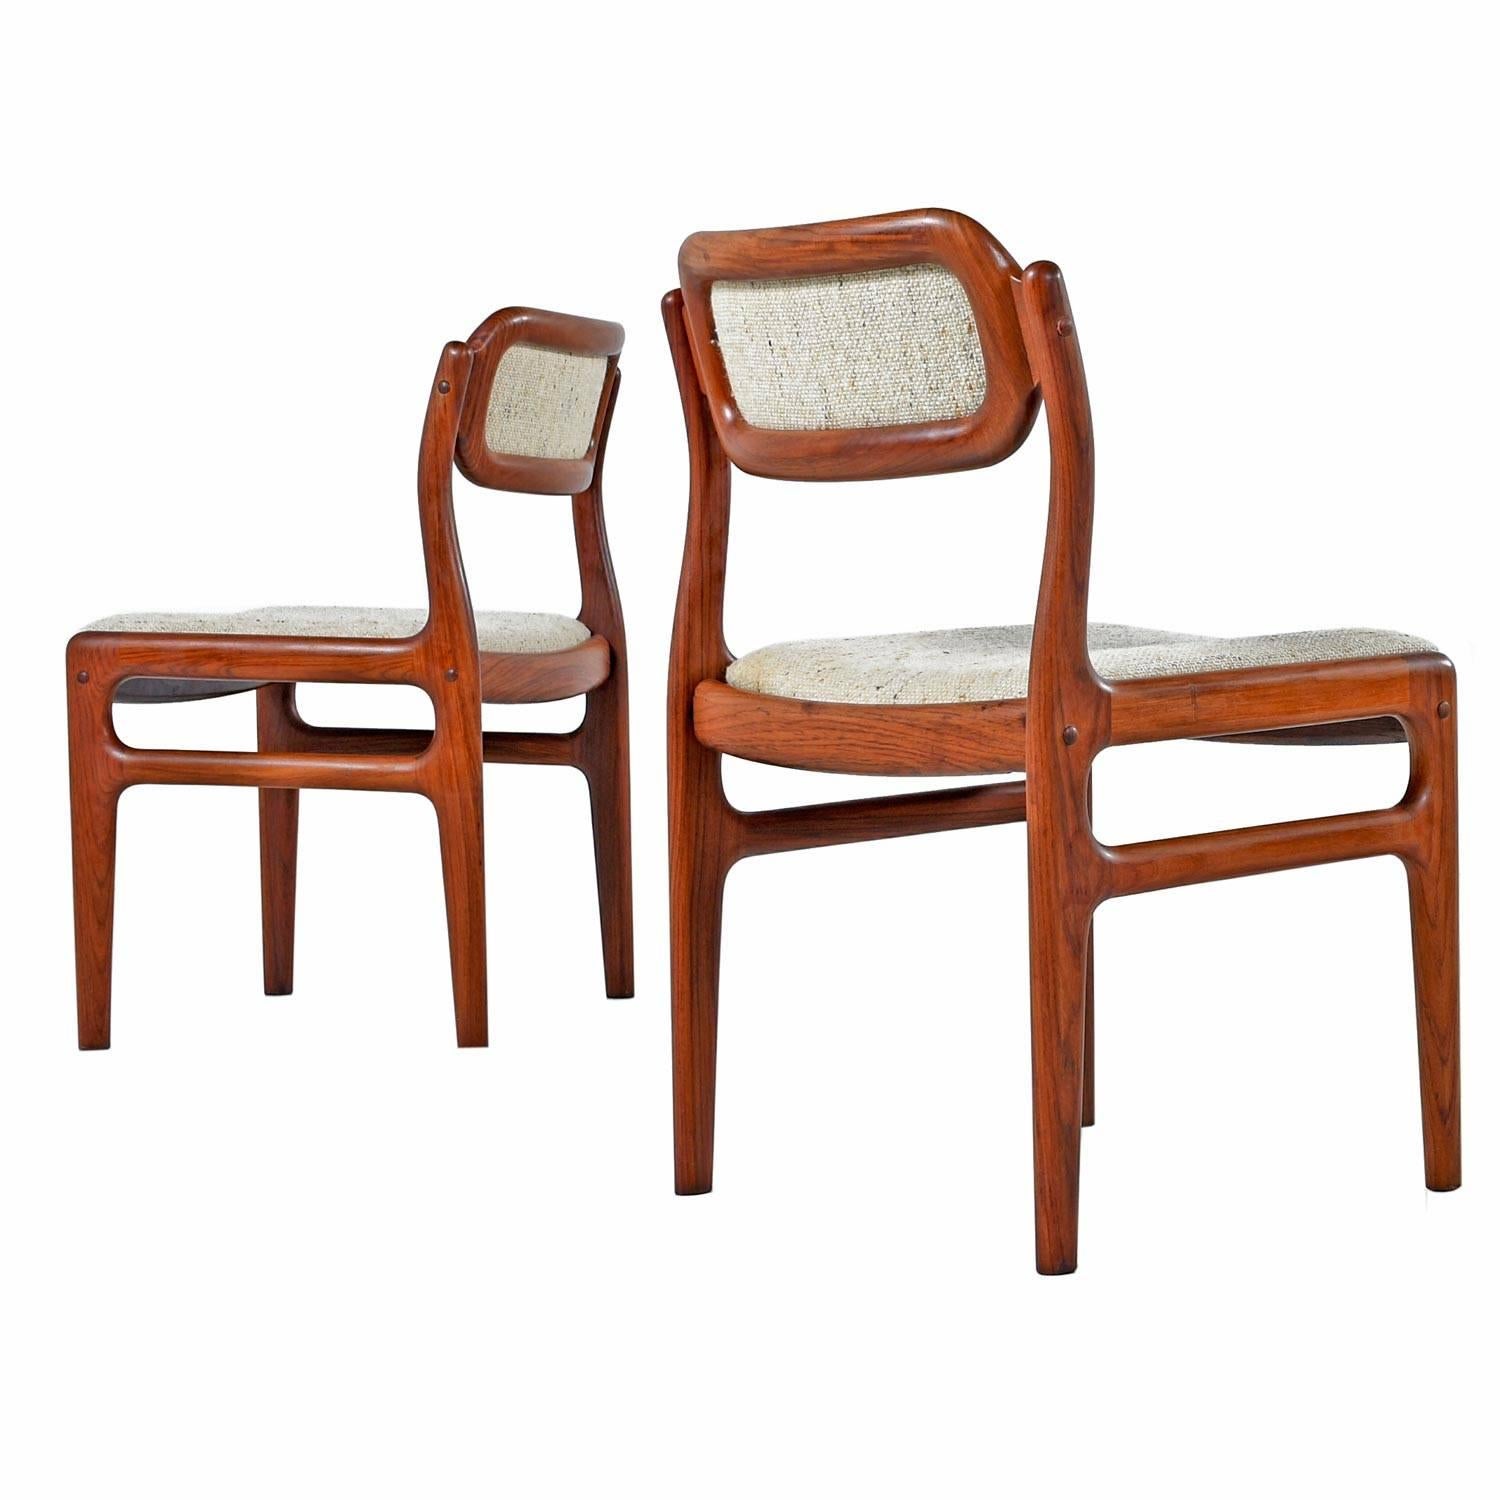 A set of four rosewood dining chairs, in the style of Niels O. Møller by Johannes Andersen for Uldum Møbelfabrik. The several decades old solid rosewood has a rich red patina that bounces beautifully against the original wool fabric.